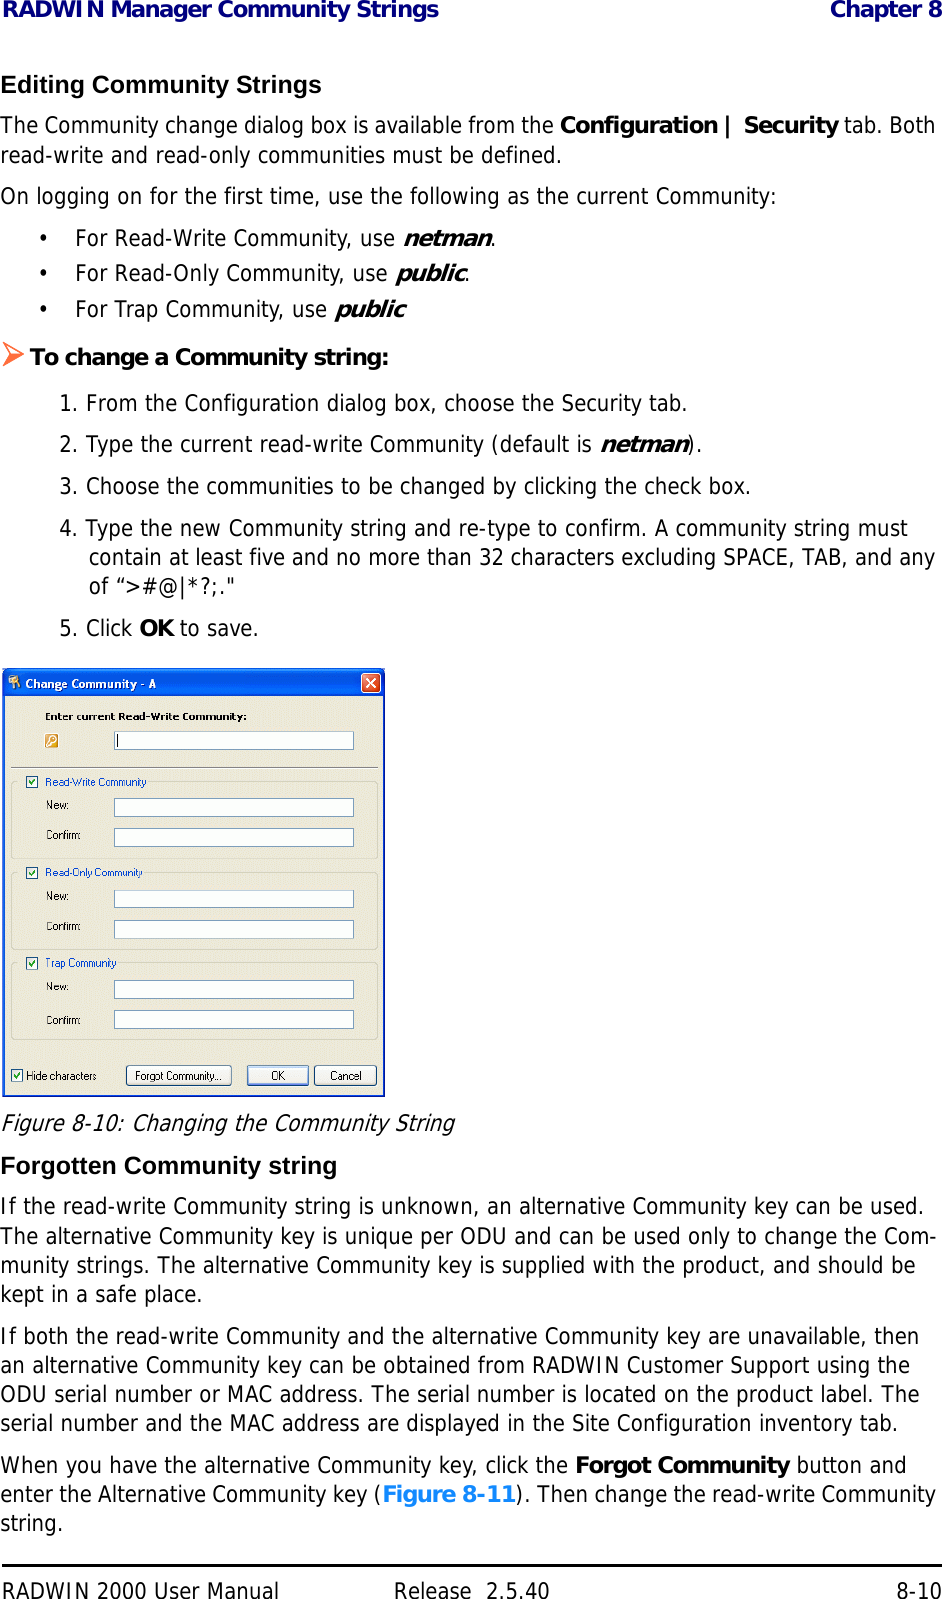 RADWIN Manager Community Strings Chapter 8RADWIN 2000 User Manual Release  2.5.40 8-10Editing Community StringsThe Community change dialog box is available from the Configuration | Security tab. Both read-write and read-only communities must be defined. On logging on for the first time, use the following as the current Community:• For Read-Write Community, use netman. • For Read-Only Community, use public.• For Trap Community, use publicTo change a Community string:1. From the Configuration dialog box, choose the Security tab.2. Type the current read-write Community (default is netman).3. Choose the communities to be changed by clicking the check box.4. Type the new Community string and re-type to confirm. A community string must contain at least five and no more than 32 characters excluding SPACE, TAB, and any of “&gt;#@|*?;.&quot;5. Click OK to save.Figure 8-10: Changing the Community StringForgotten Community stringIf the read-write Community string is unknown, an alternative Community key can be used. The alternative Community key is unique per ODU and can be used only to change the Com-munity strings. The alternative Community key is supplied with the product, and should be kept in a safe place. If both the read-write Community and the alternative Community key are unavailable, then an alternative Community key can be obtained from RADWIN Customer Support using the ODU serial number or MAC address. The serial number is located on the product label. The serial number and the MAC address are displayed in the Site Configuration inventory tab.When you have the alternative Community key, click the Forgot Community button and enter the Alternative Community key (Figure 8-11). Then change the read-write Community string.